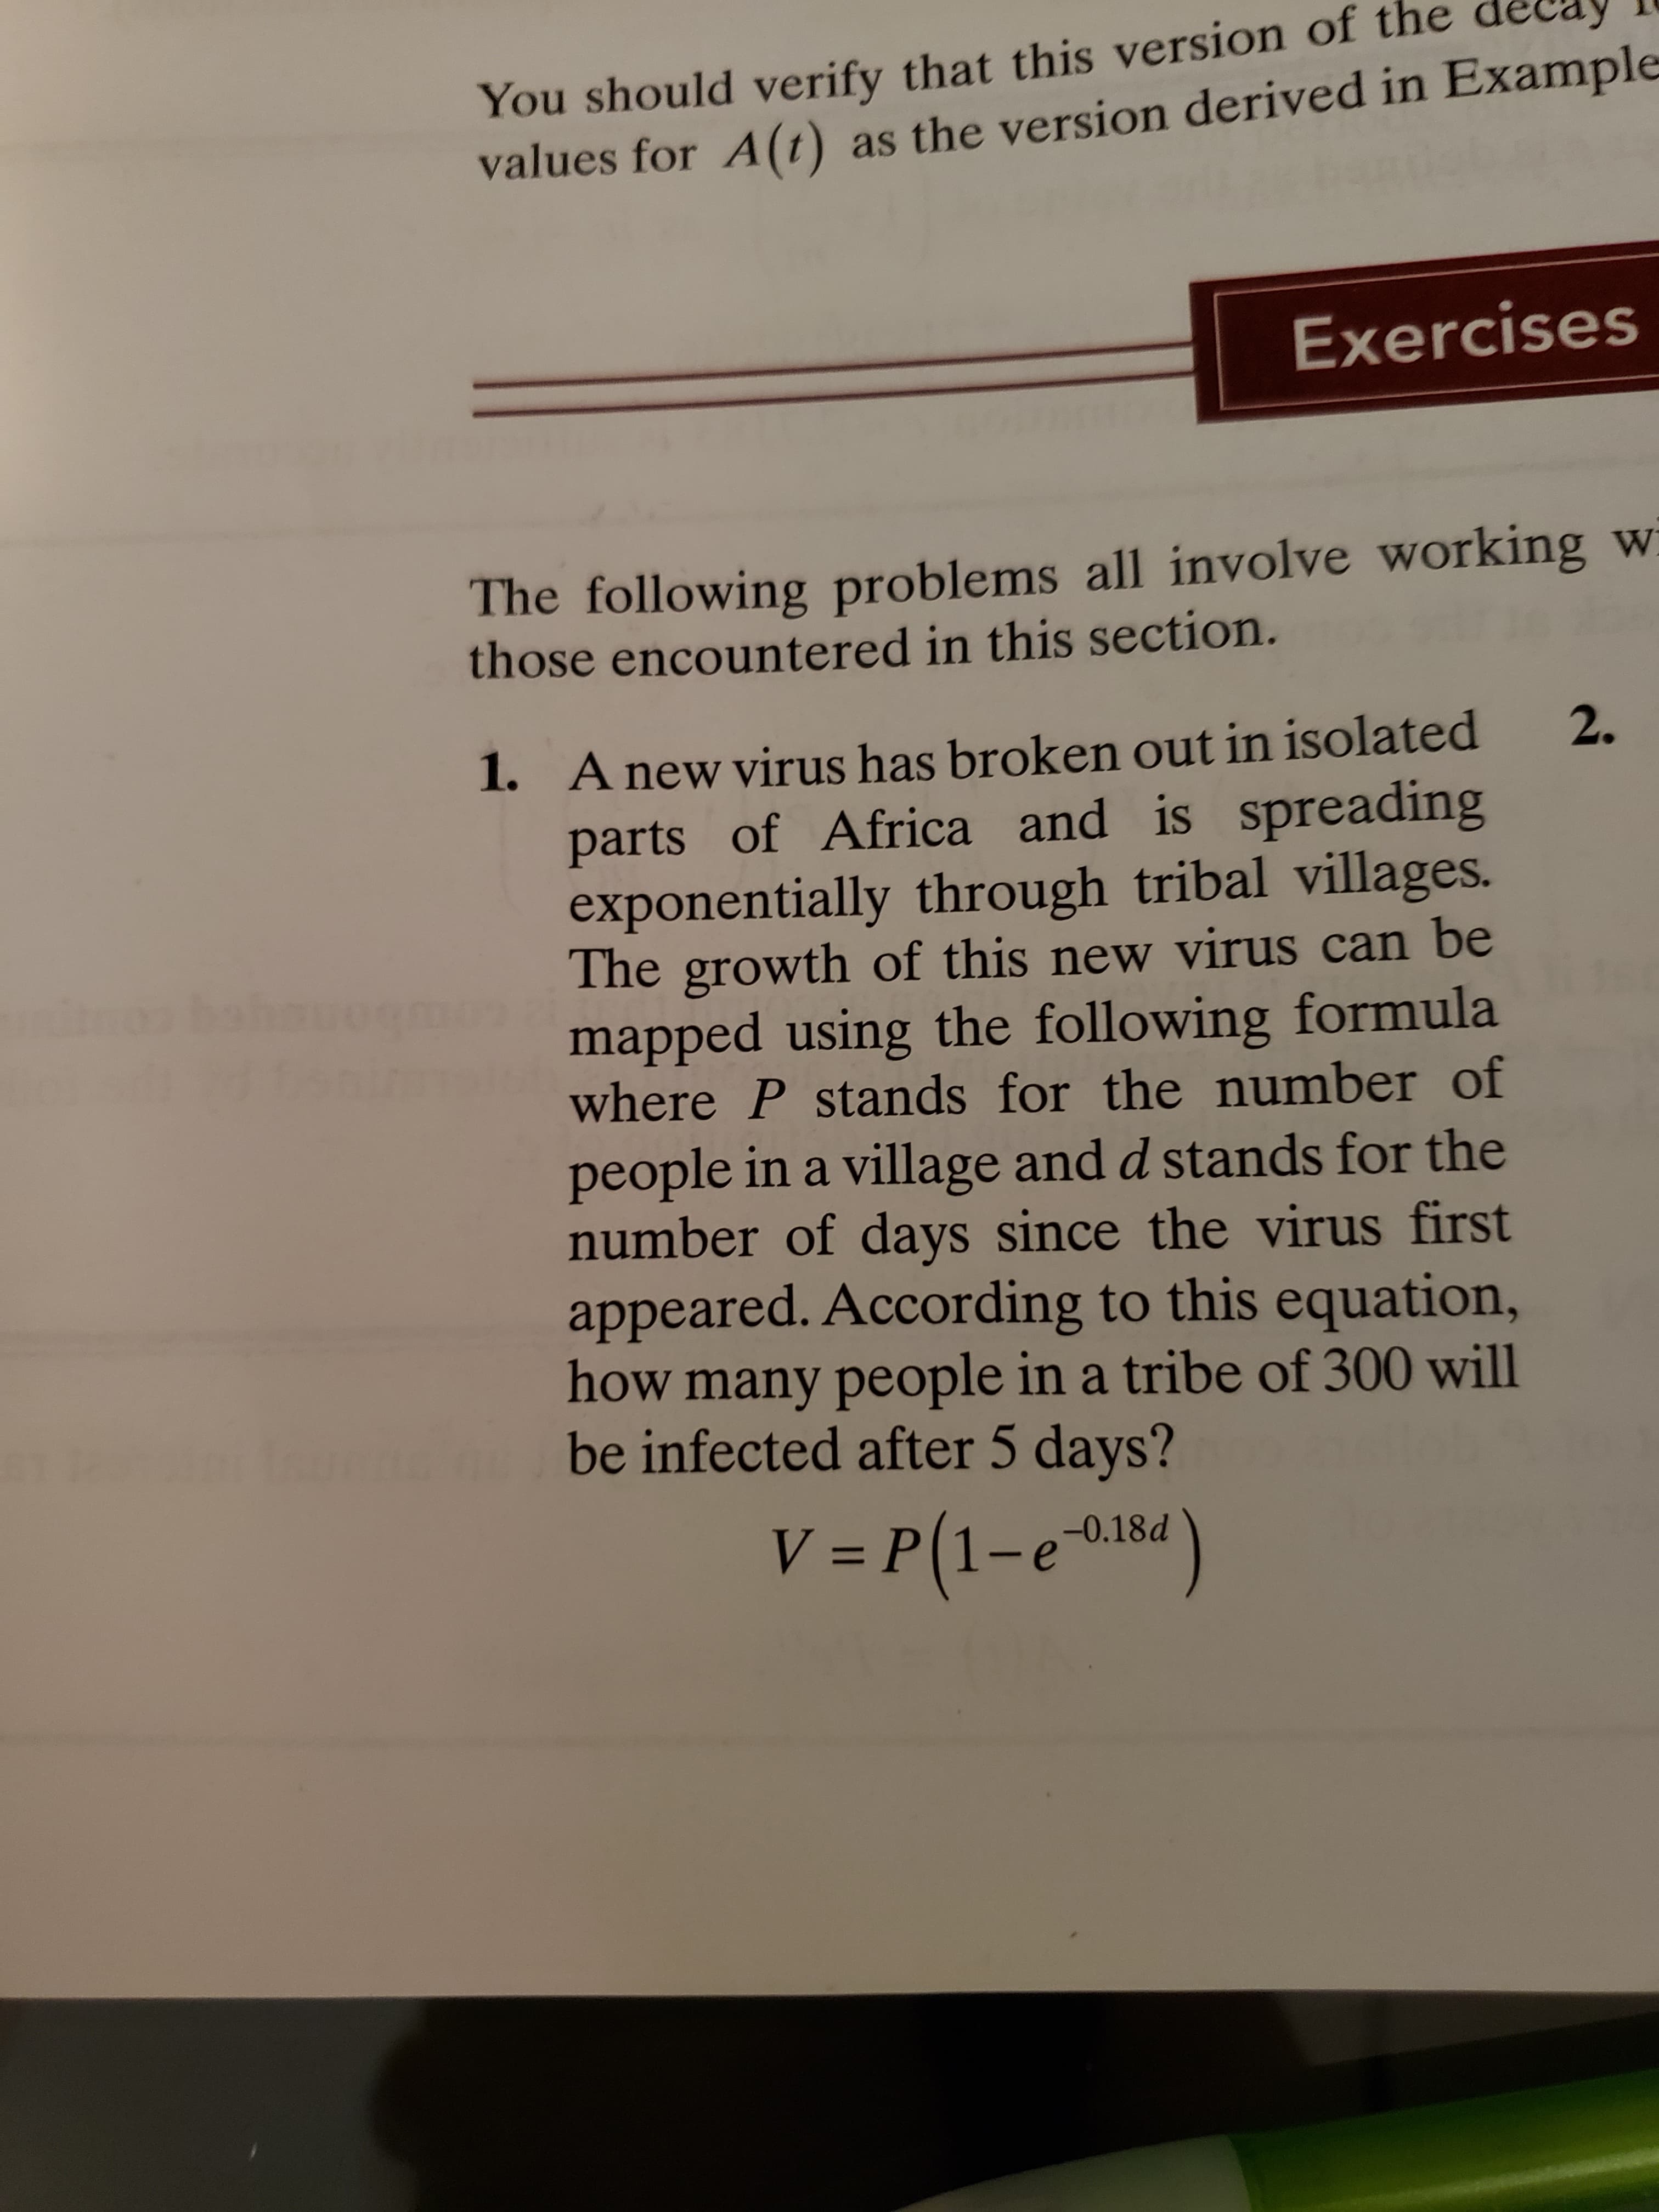 You should verify that this version of the
values for A(1) as the version derived in Example
Exercises
%3D
The following problems all involve working w
those encountered in this section.
1. A new virus has broken out in isolated
parts of Africa and is spreading
exponentially through tribal villages.
The growth of this new virus can be
mapped using the following formula
where P stands for the number of
2.
people in a village and d stands for the
number of days since the virus first
appeared. According to this equation,
how many people in a tribe of 300 will
be infected after 5 days?
V = P(1-ei84)
-0.18d
